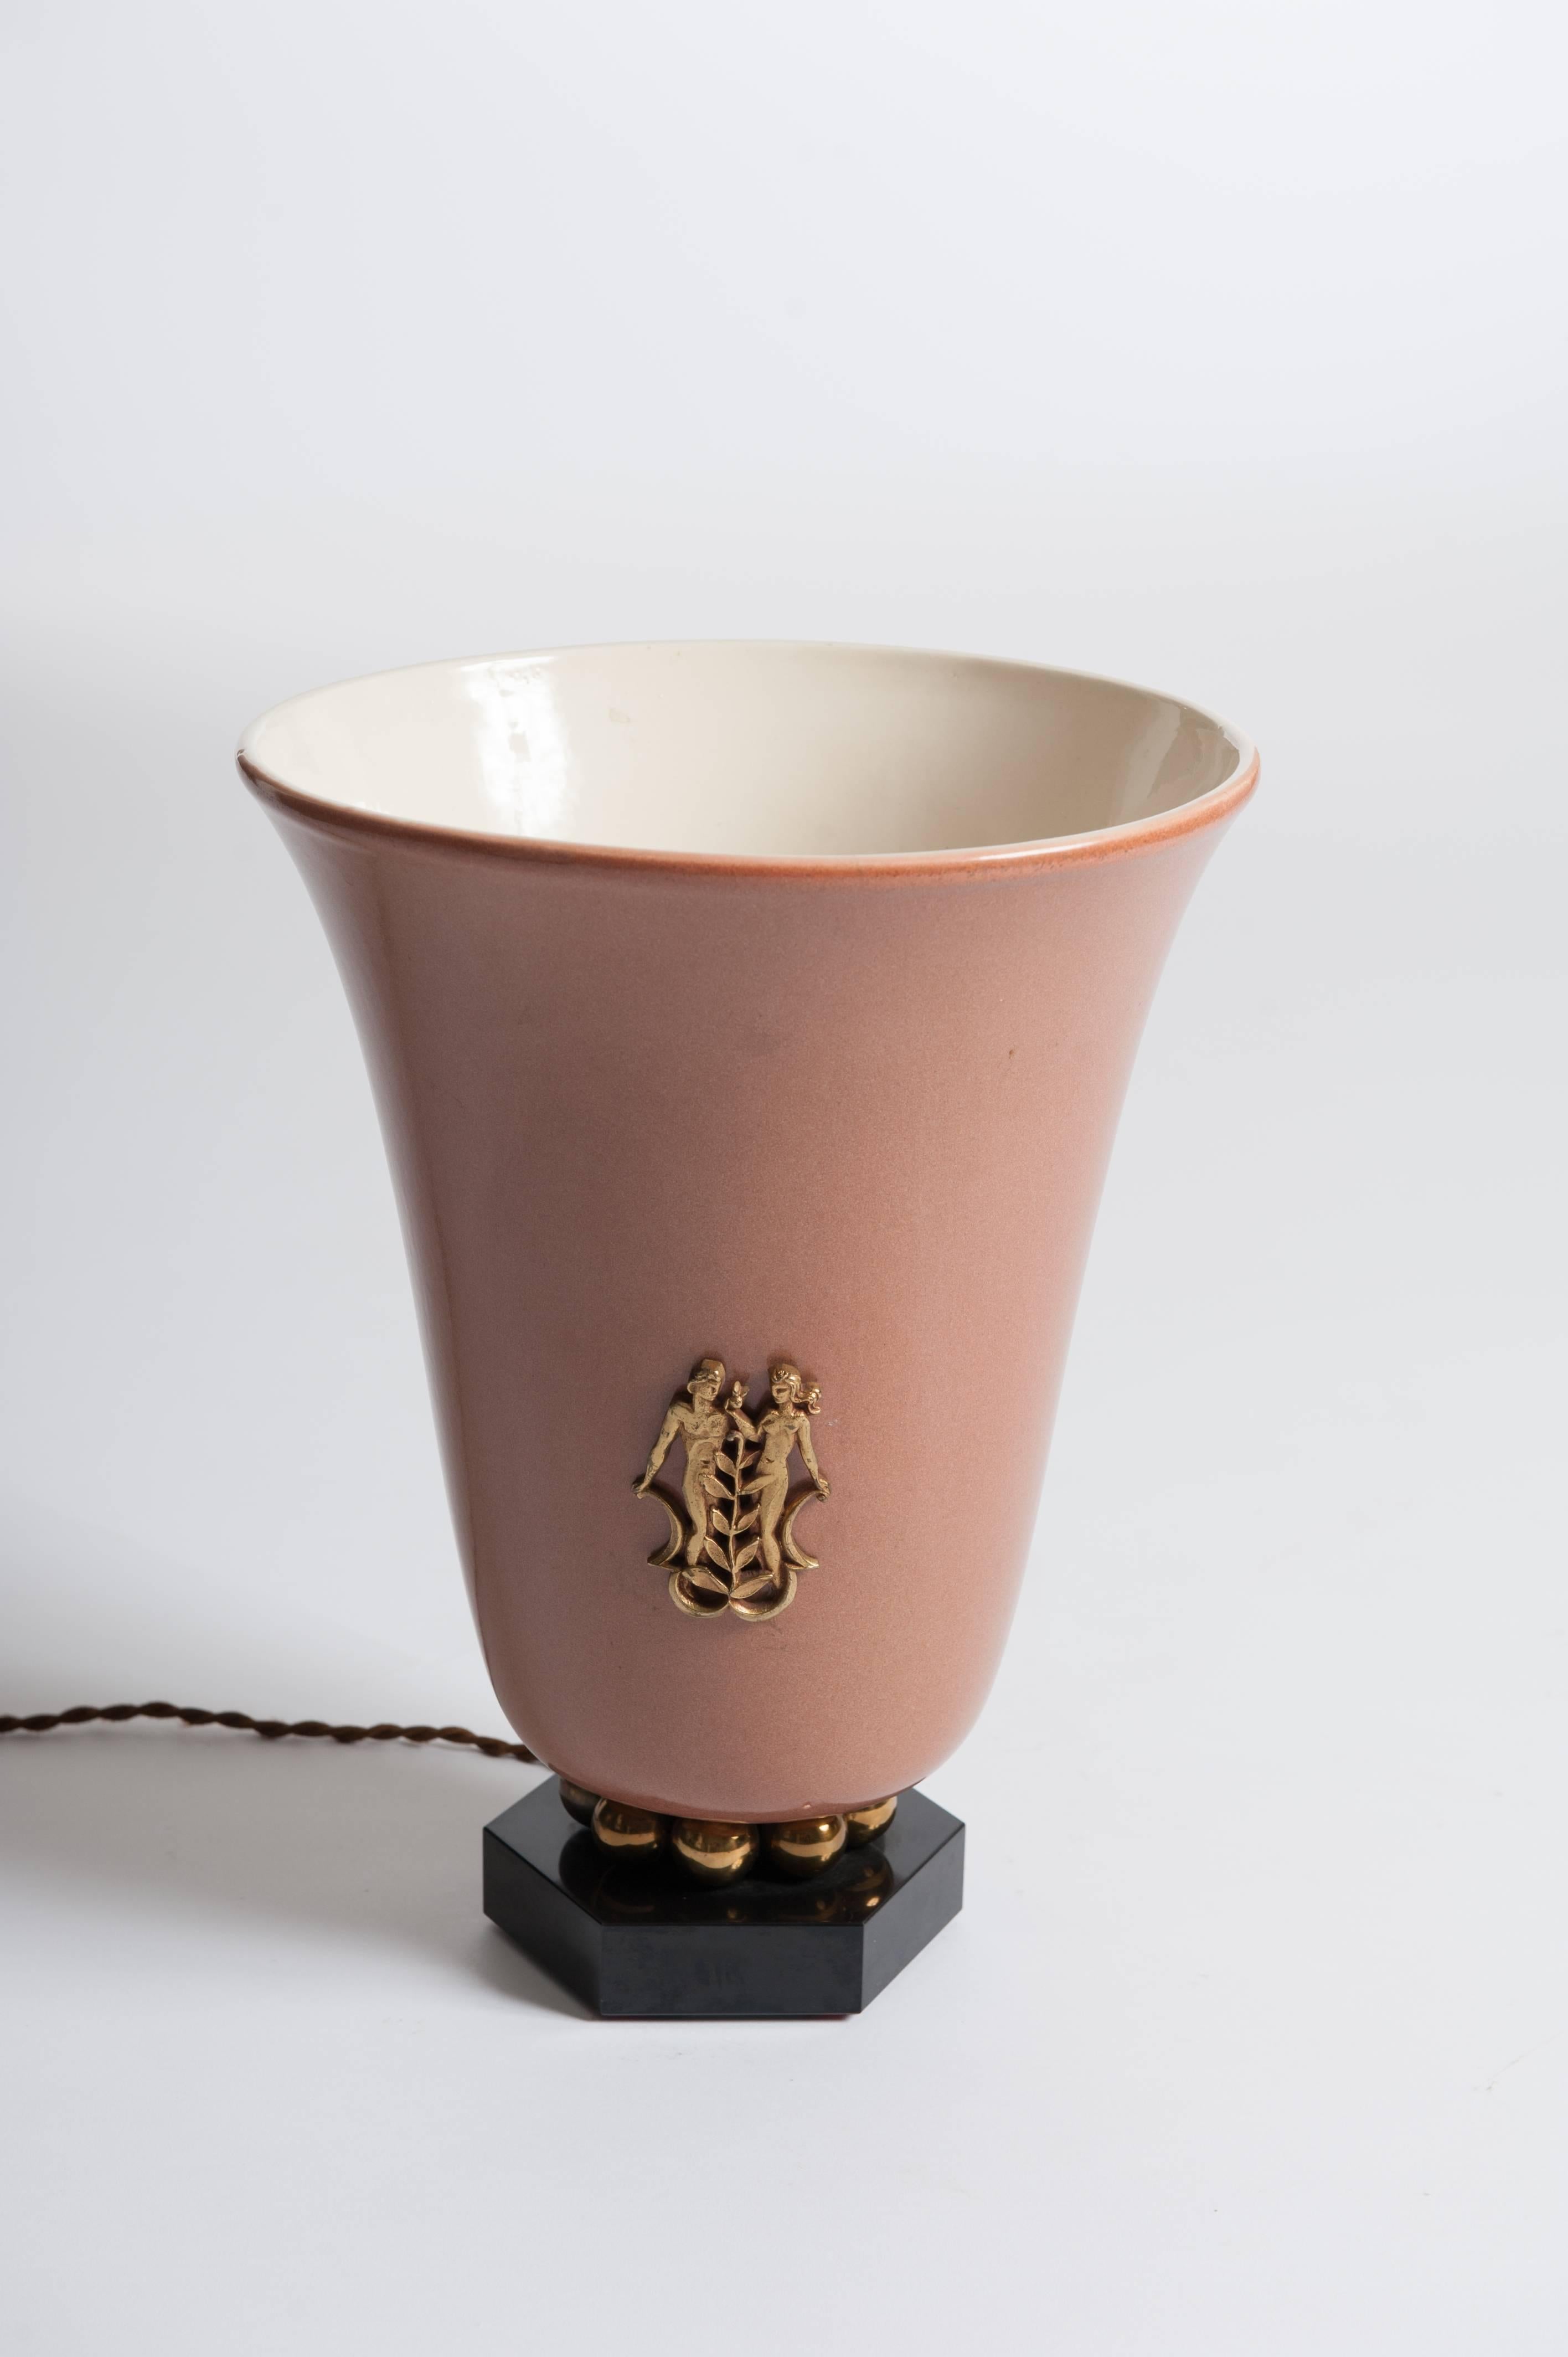 Ceramic shade in a conical design with a slightly outward curved edge in a very decorative brown-sandy color.
The inner wall is creamy white.
The ceramic body has a fine stylized bronze depiction of Adam and Eve in the front.
Eve is holding an apple